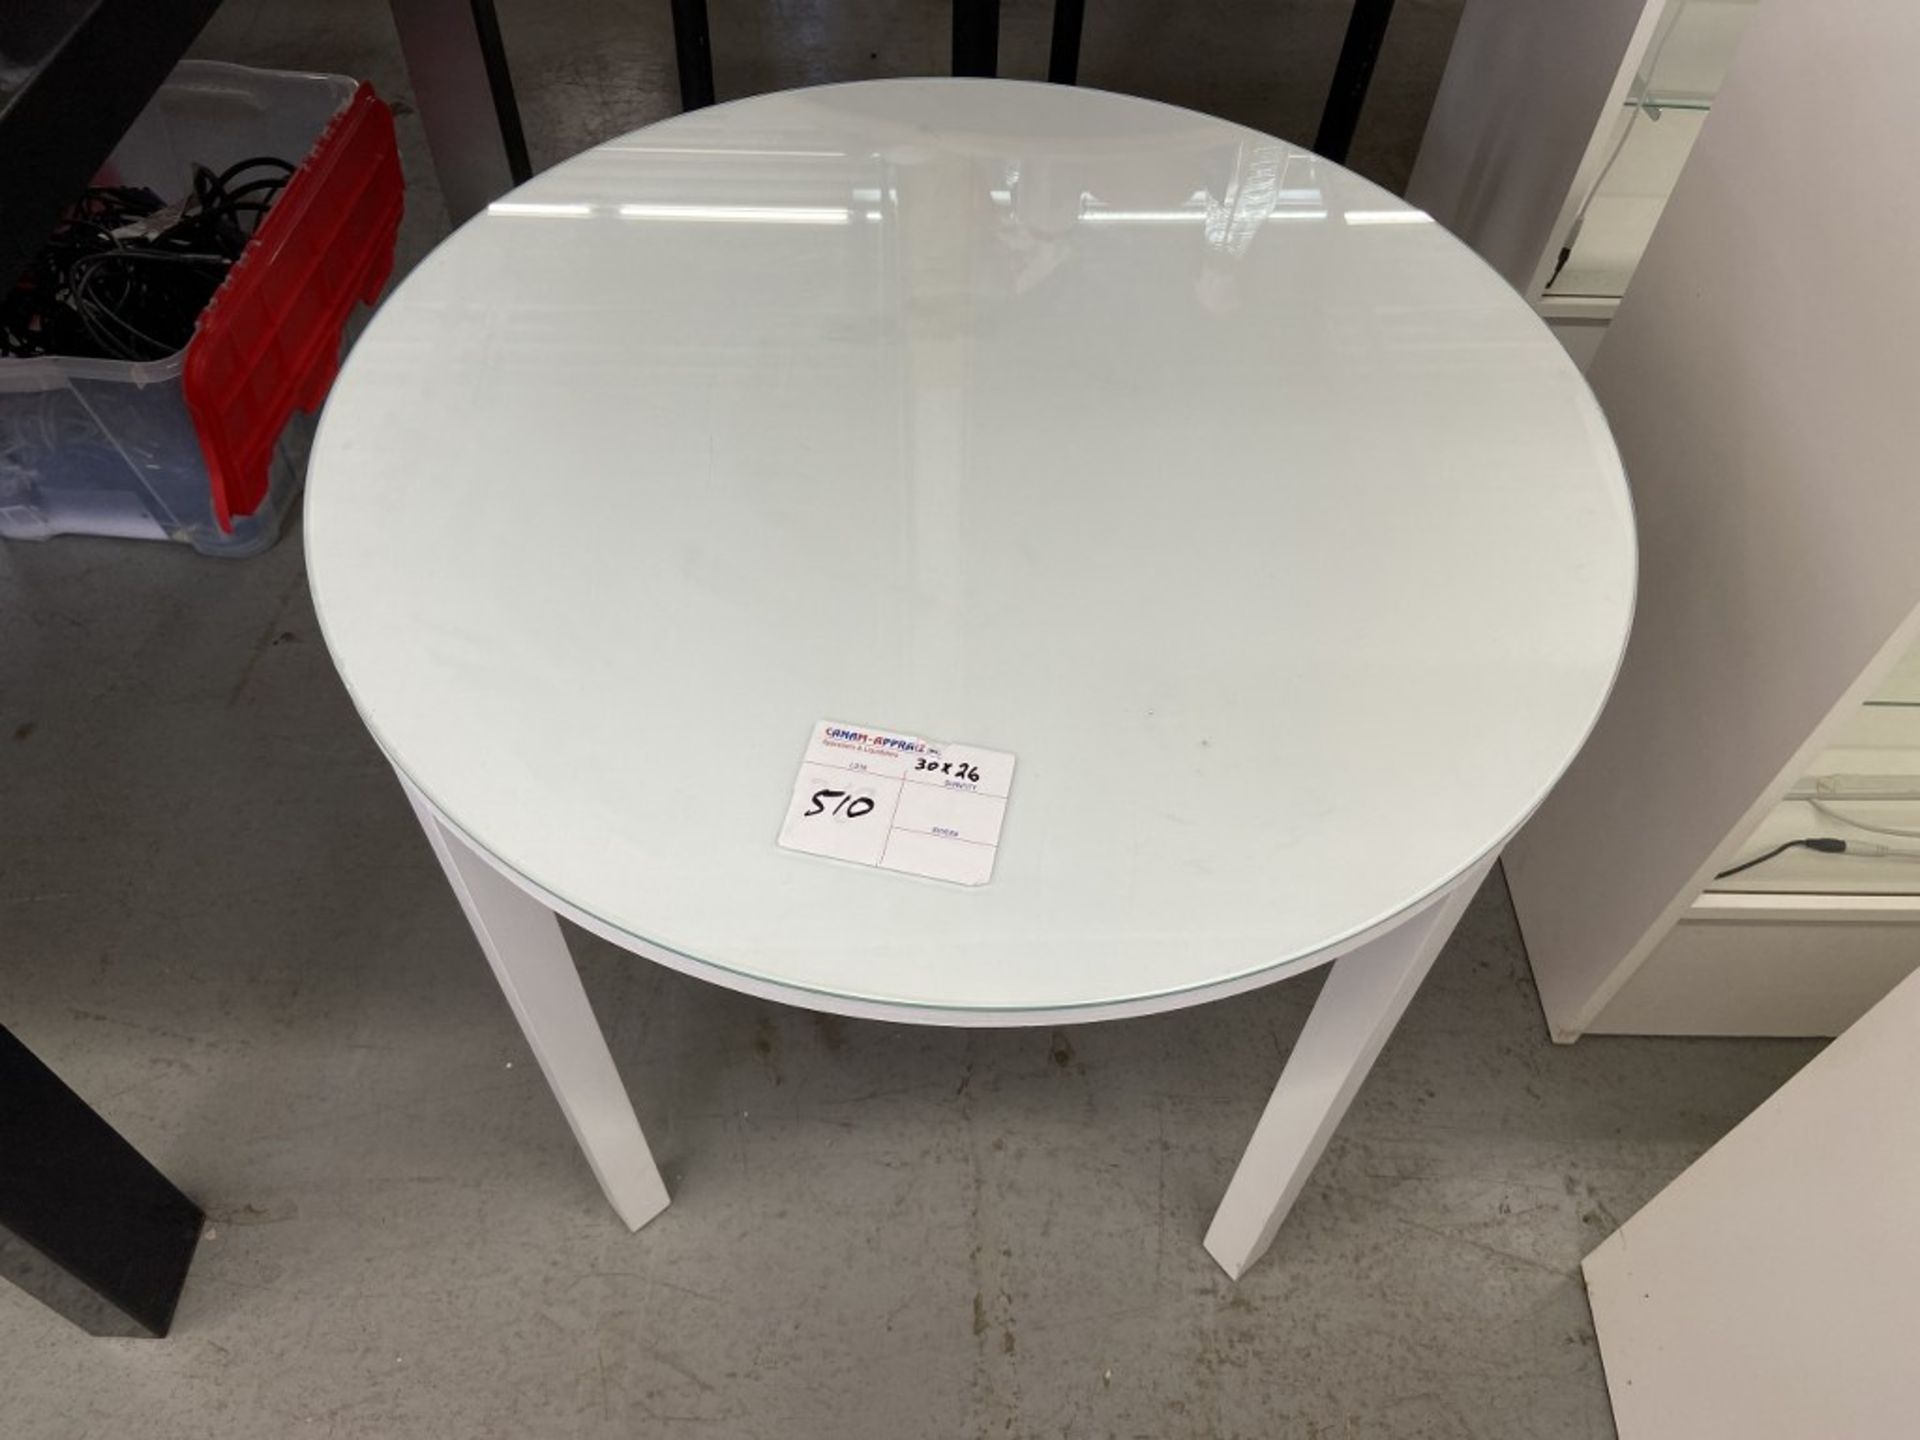 30" ROUND TABLE W/GLASS TOP